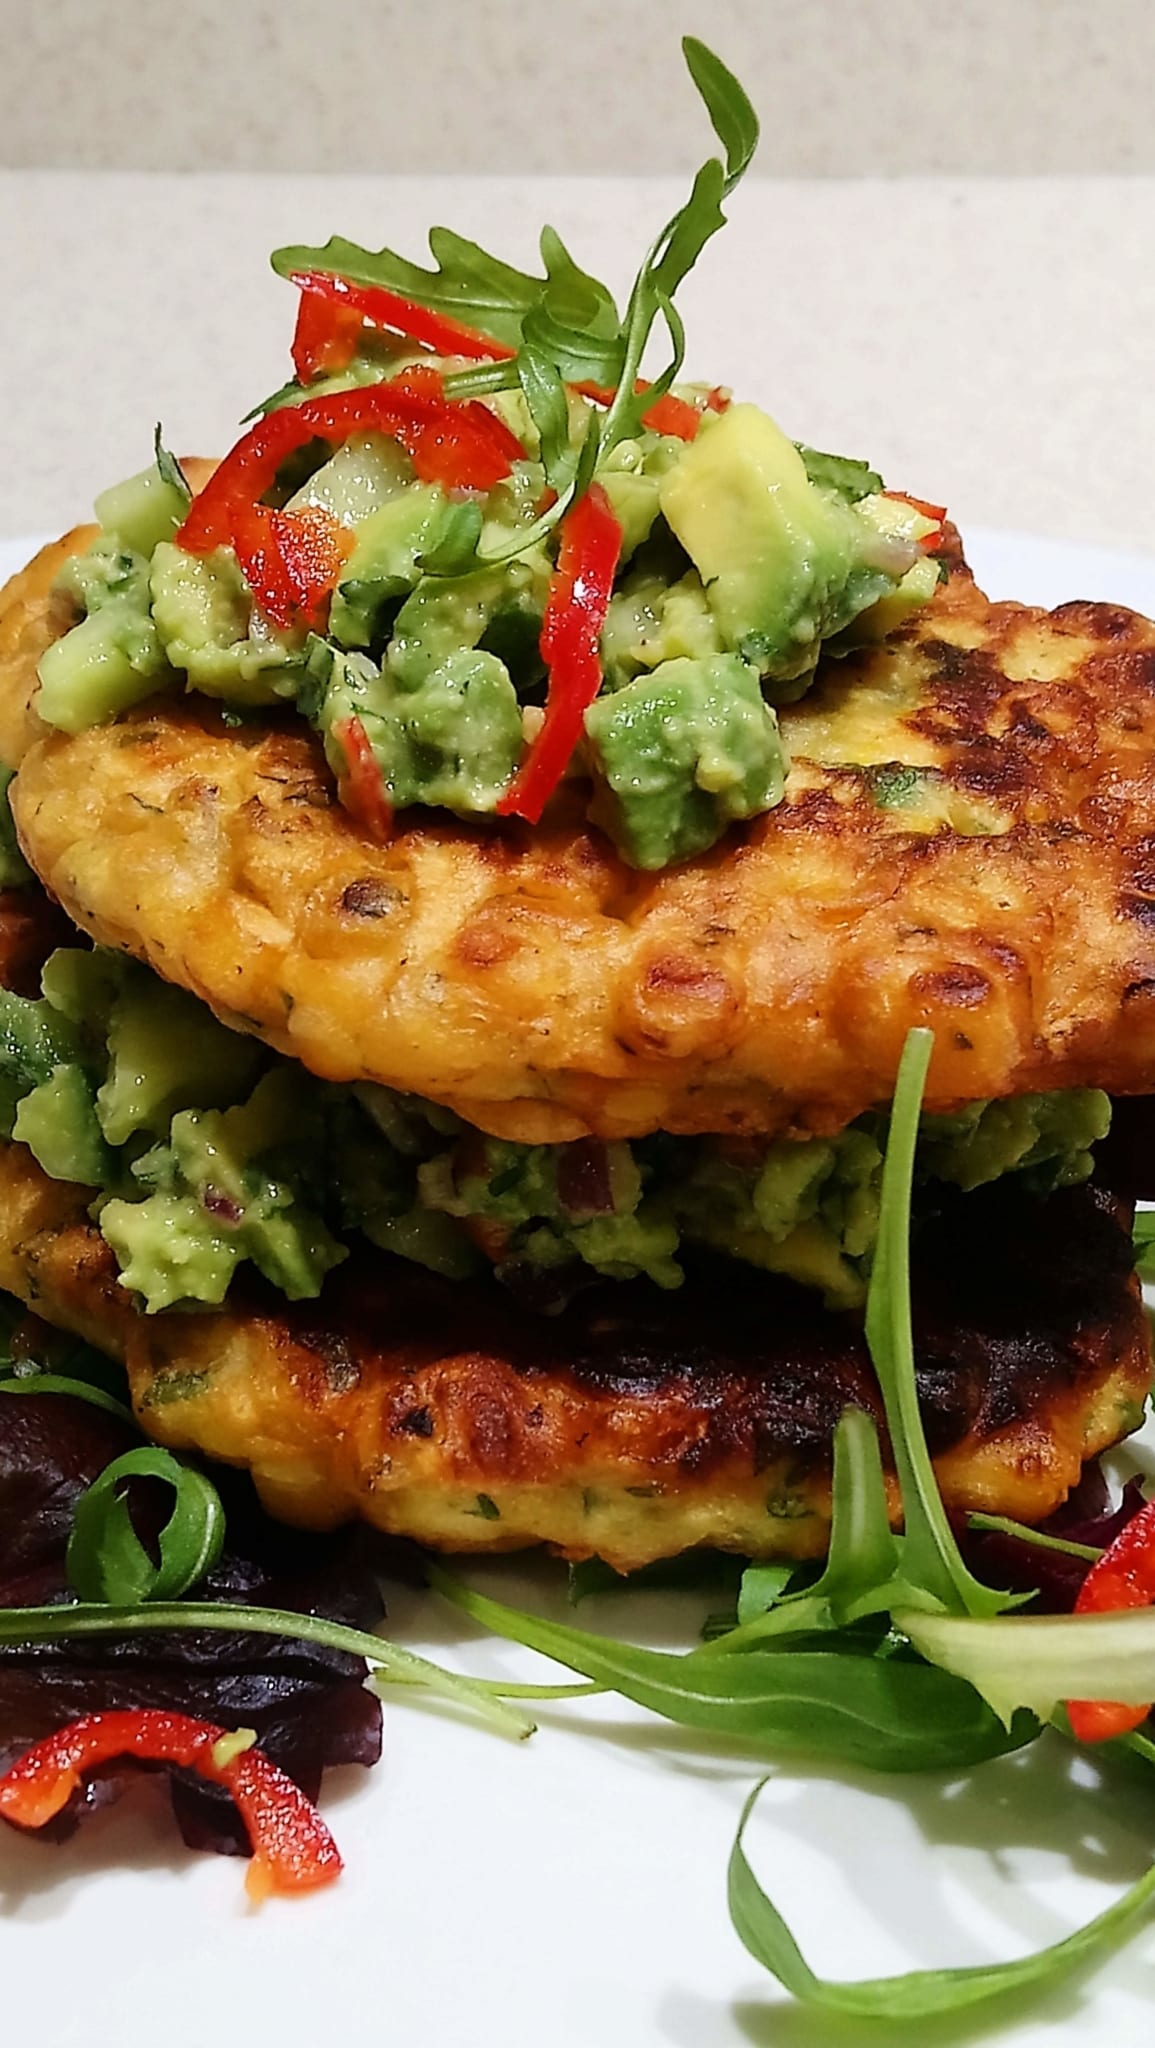 Sweetcorn pancakes with a filling of avocado guacamole